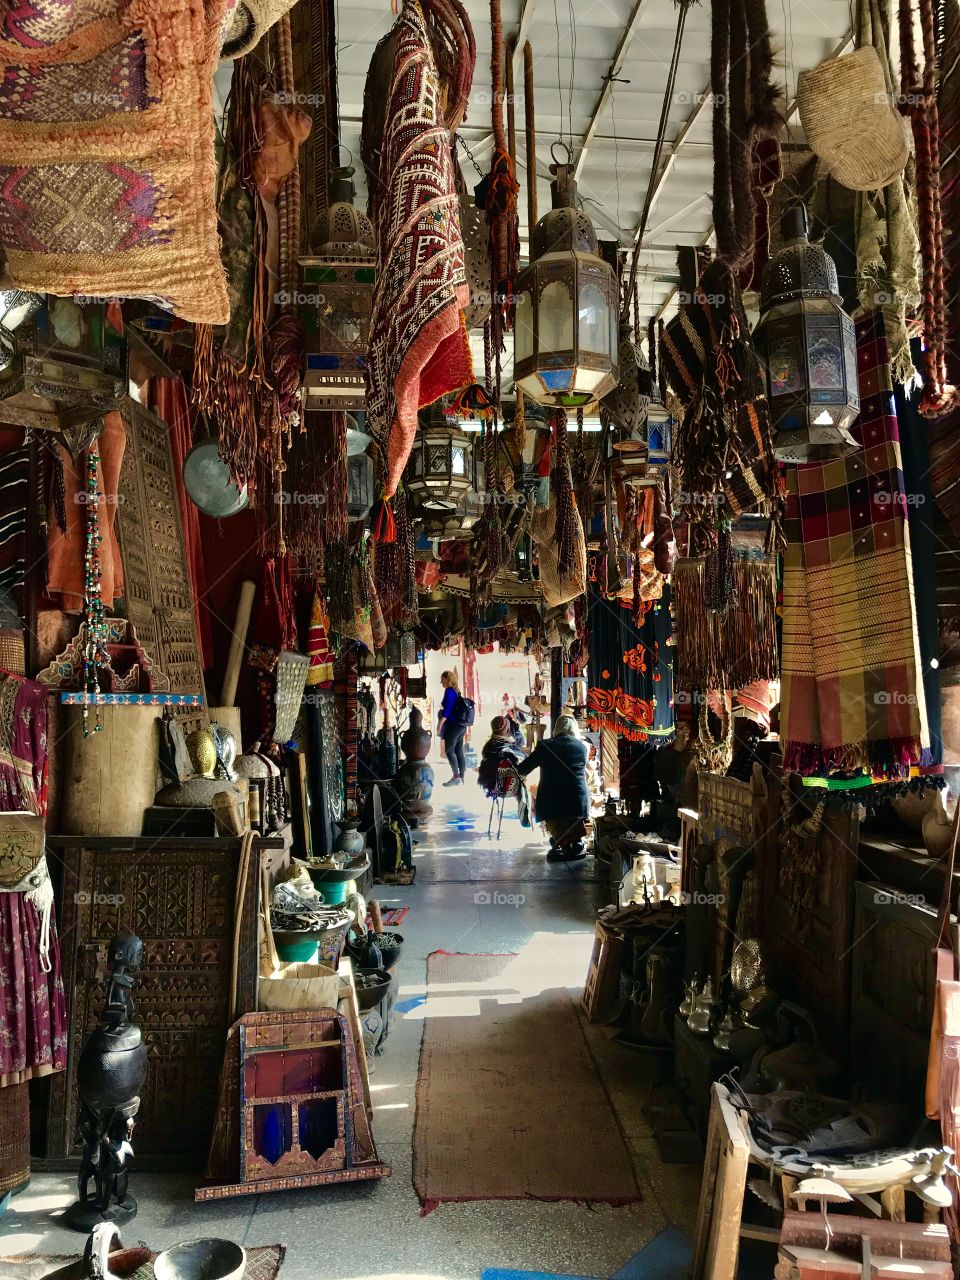 Beautiful furnished shop in Marrakech full of textiles leathers and objects jn marrocan style